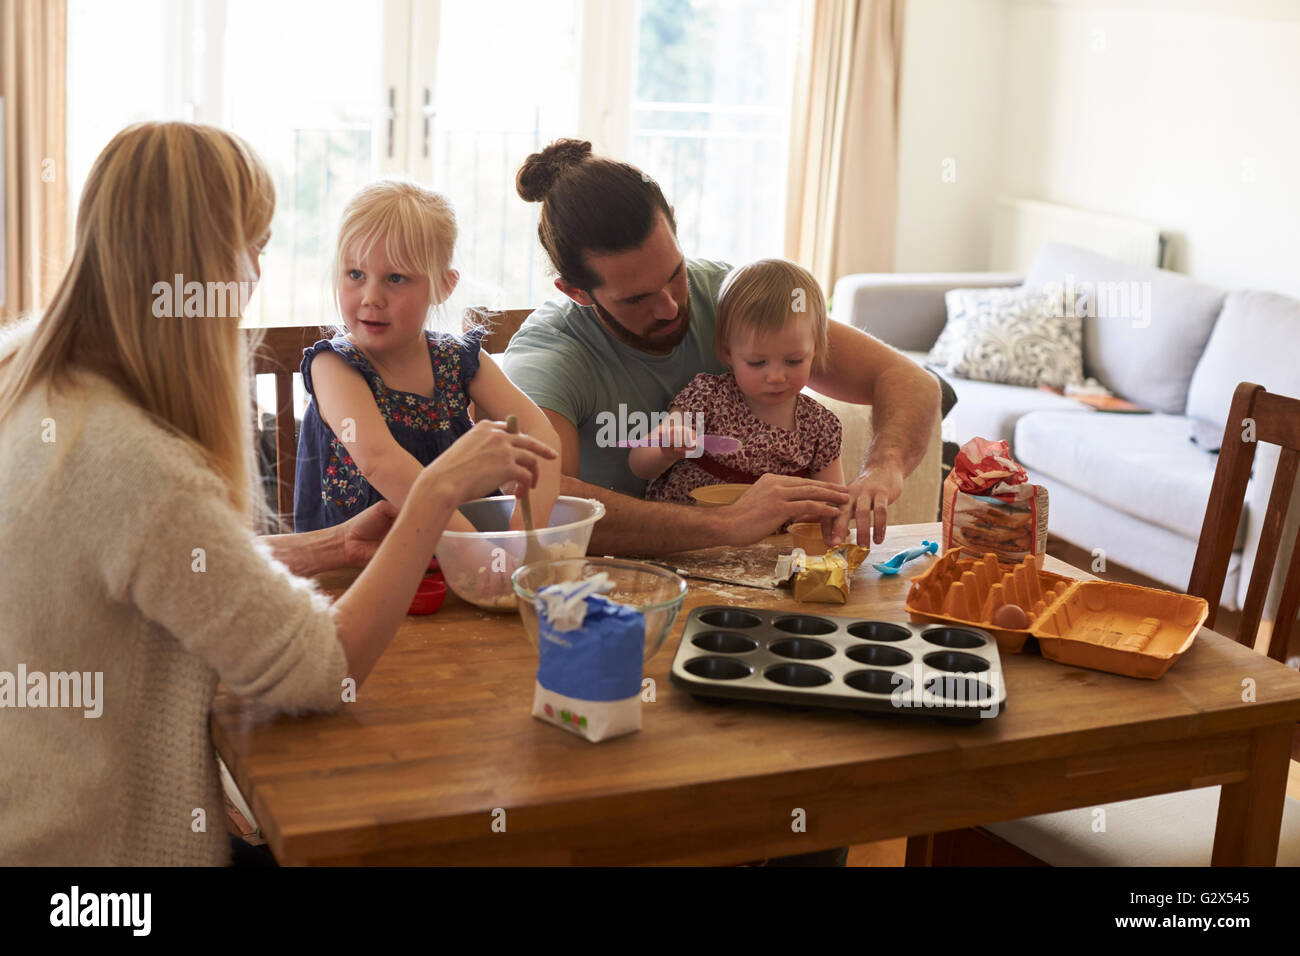 Family At Home Baking Cakes Together Stock Photo